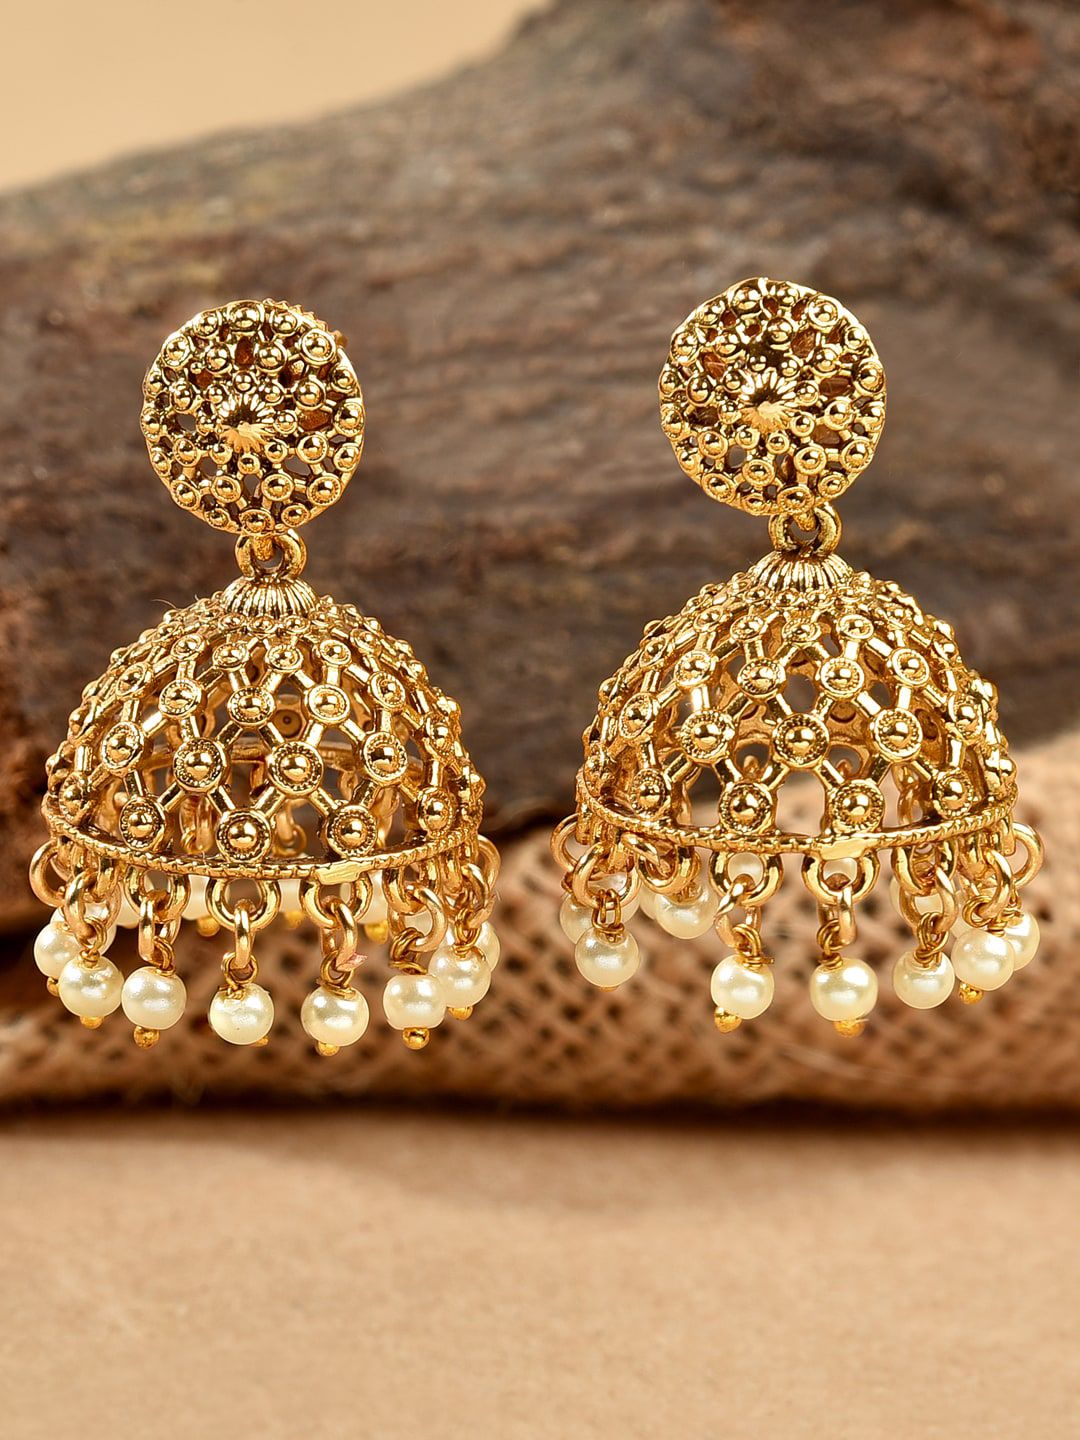 Fida Gold-Toned Dome Shaped Jhumkas Earrings Price in India